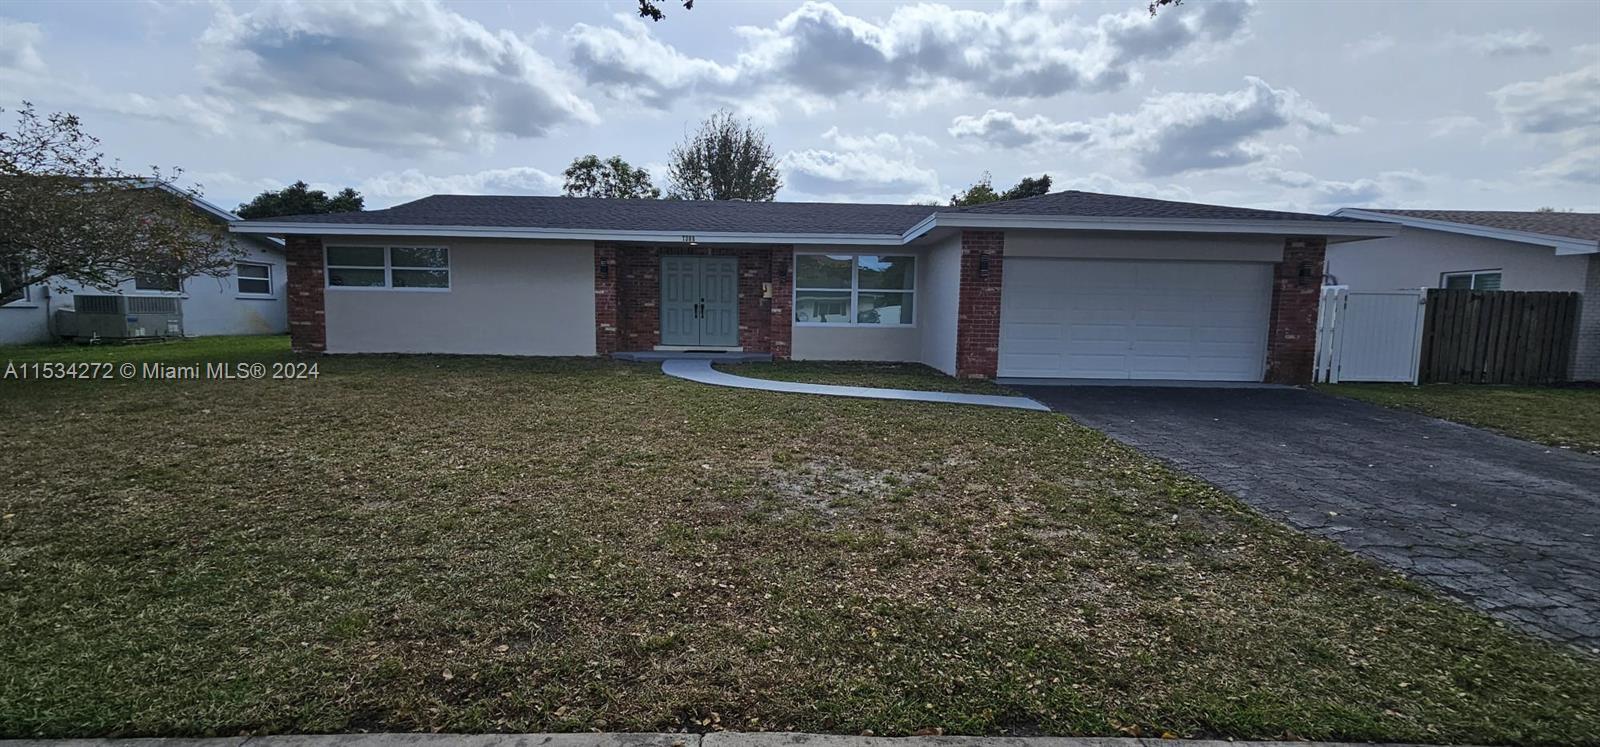 Photo of 7380 NW 15th St in Plantation, FL